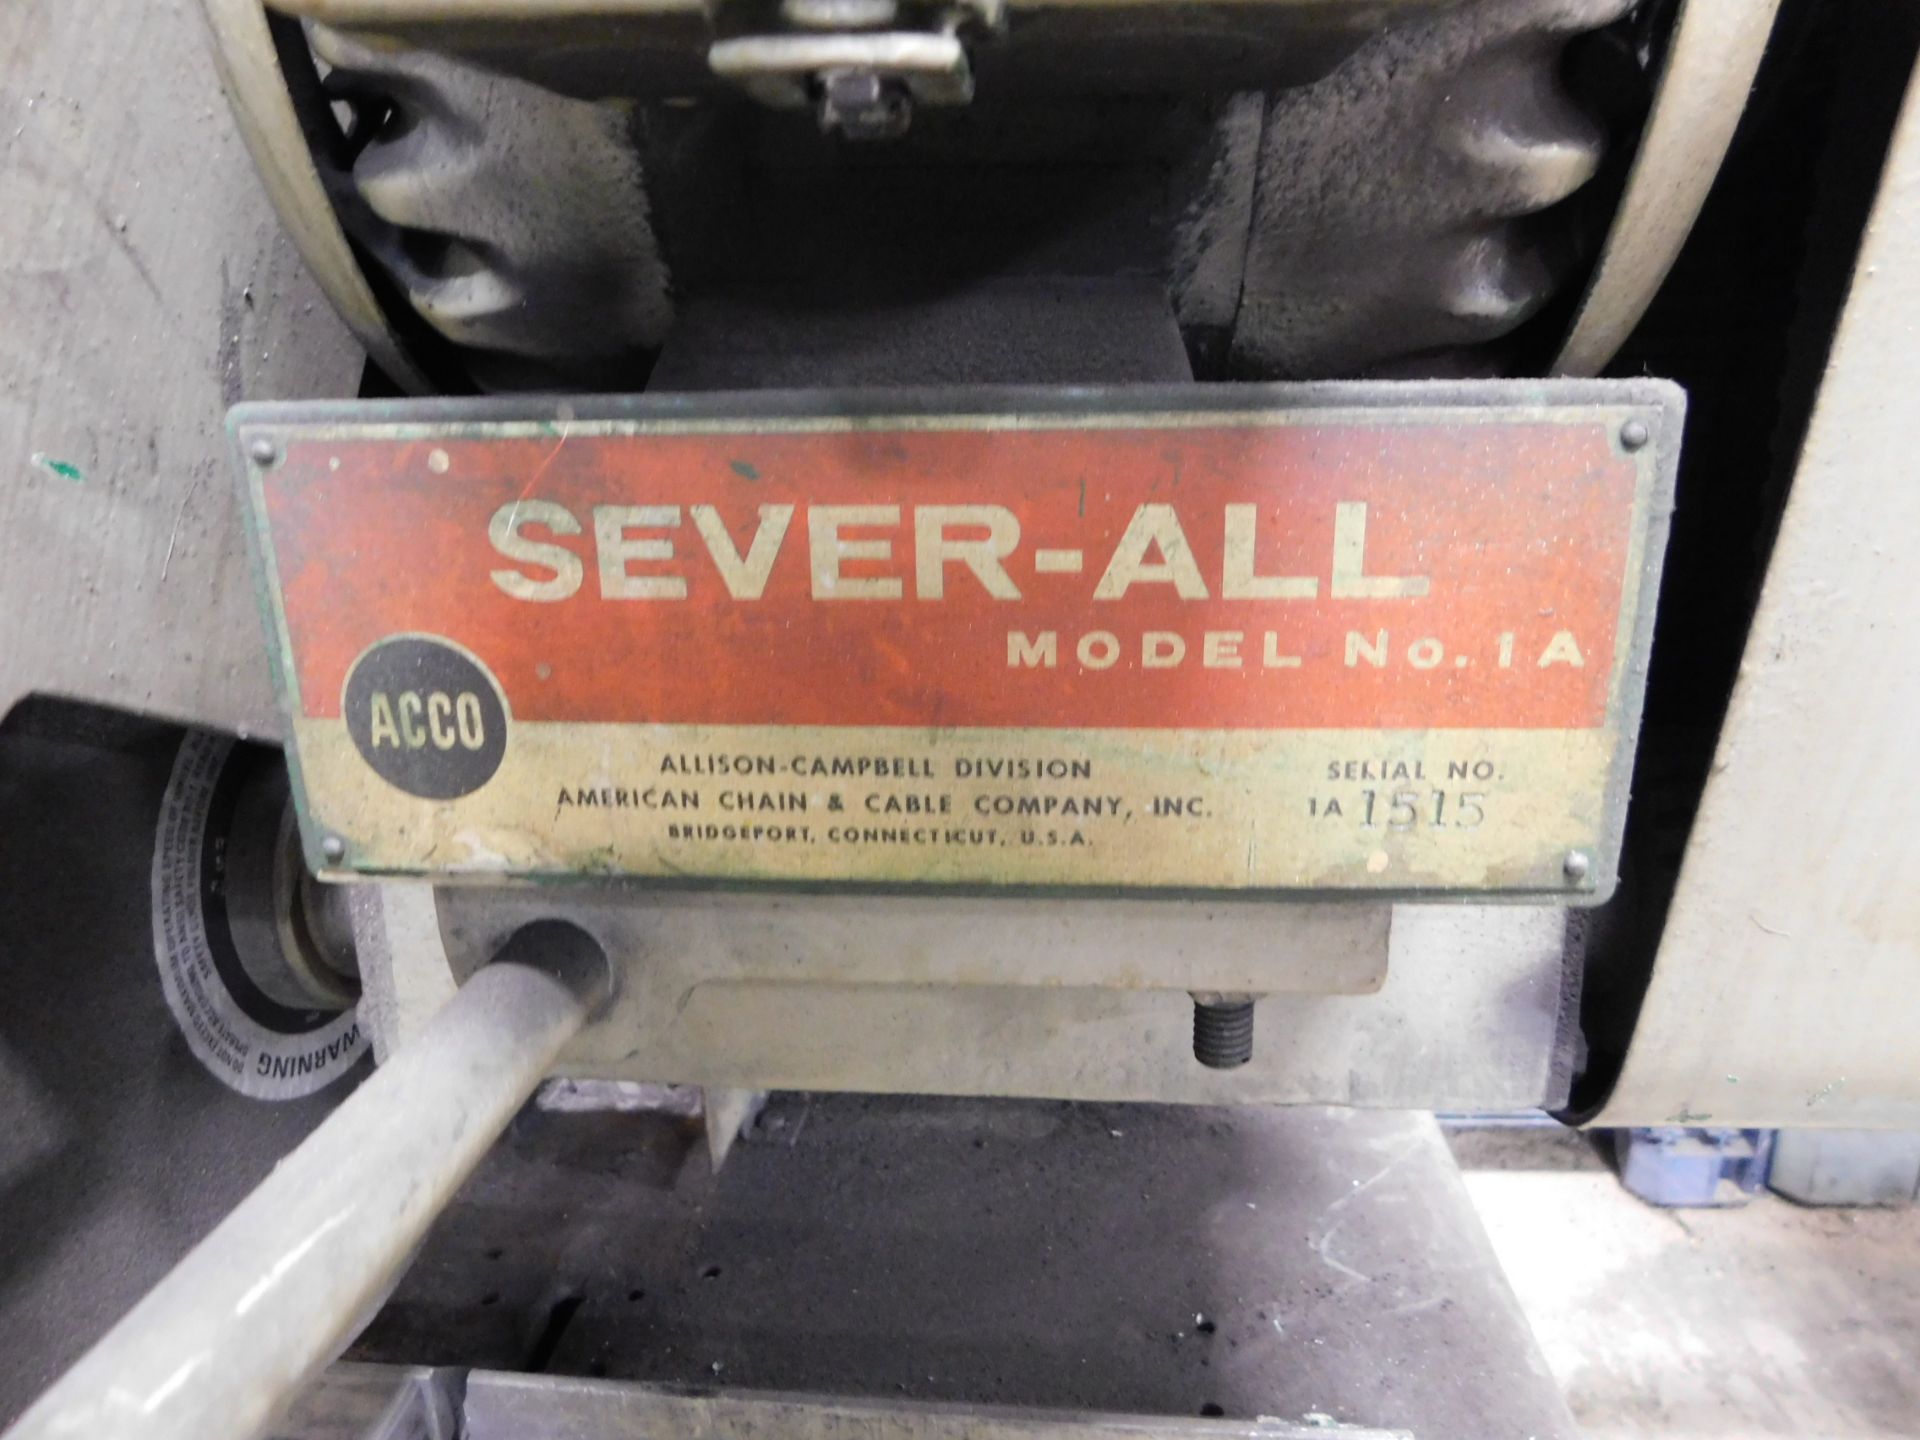 Acco Sever-All Model 1A Cut Off Saw - Image 4 of 6